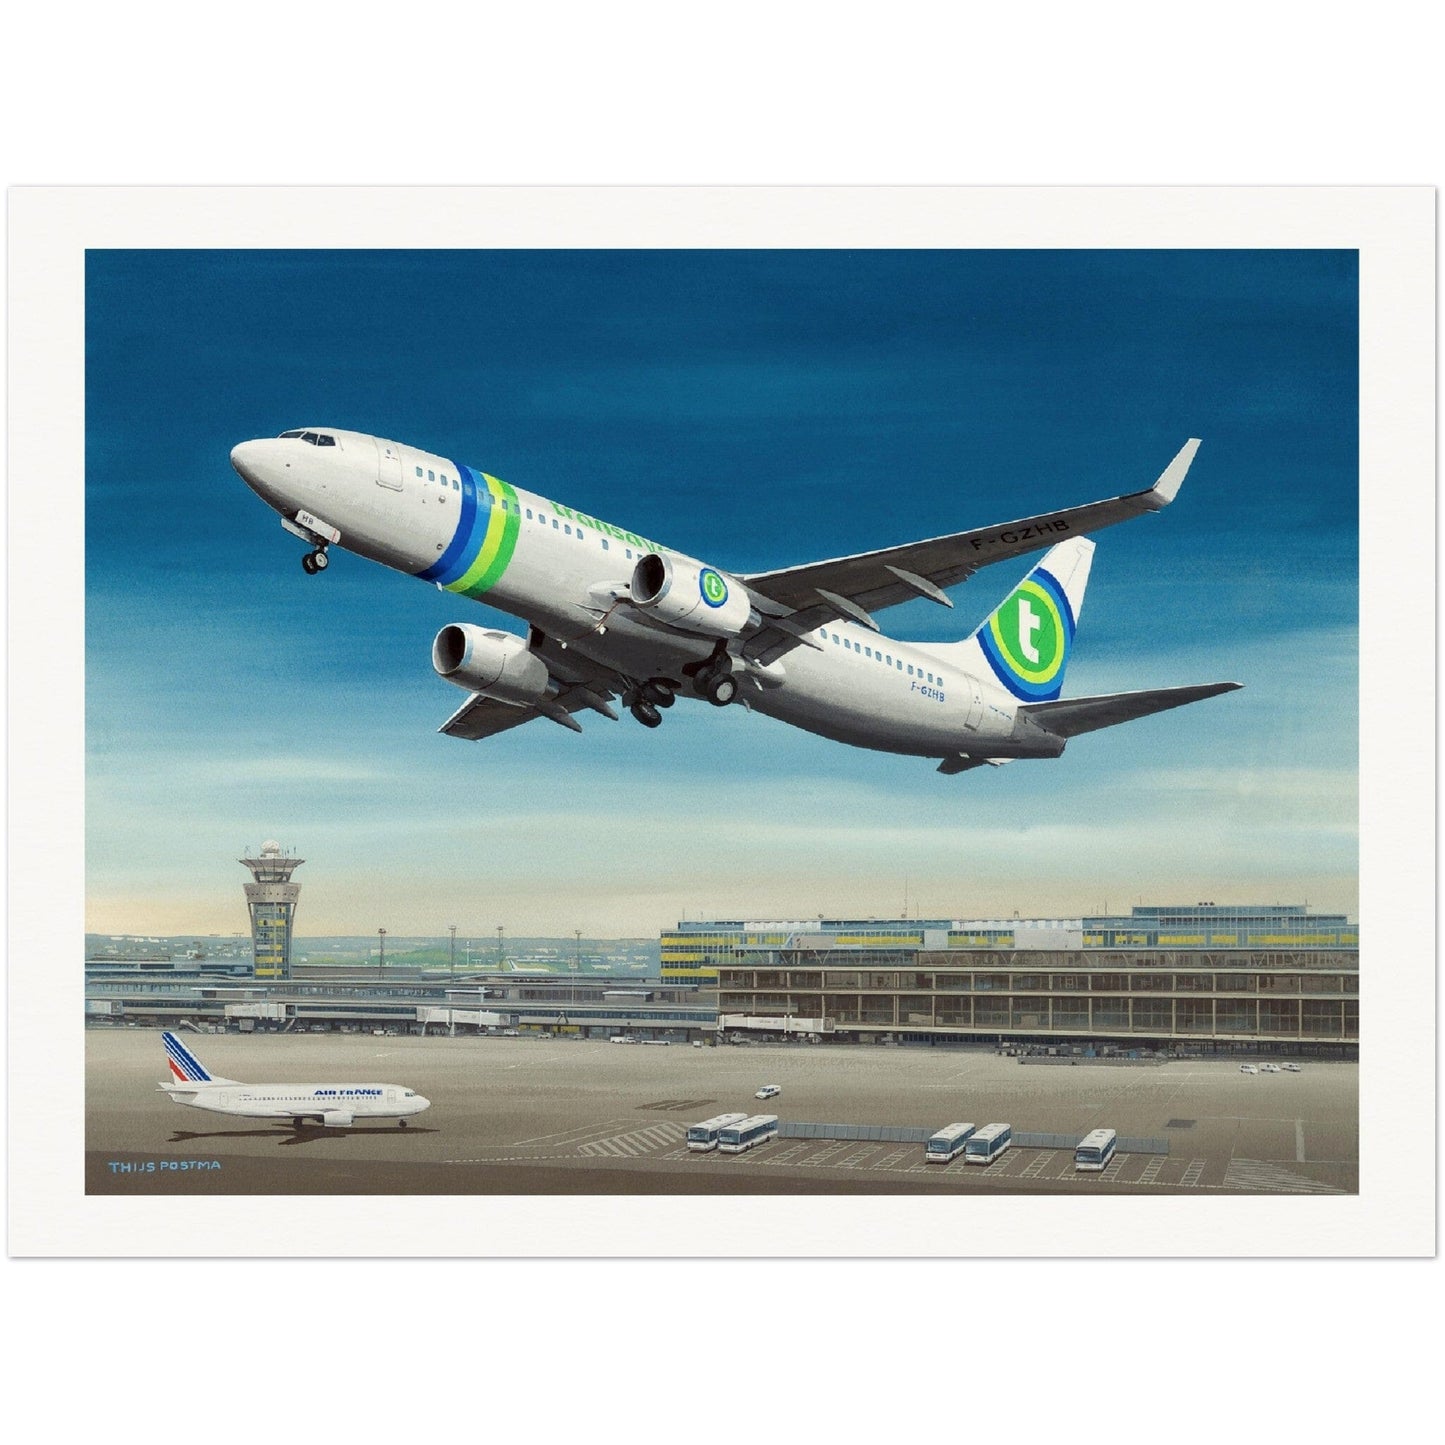 Thijs Postma - Poster - Boeing 737-800 Transavia Orly Poster Only TP Aviation Art 